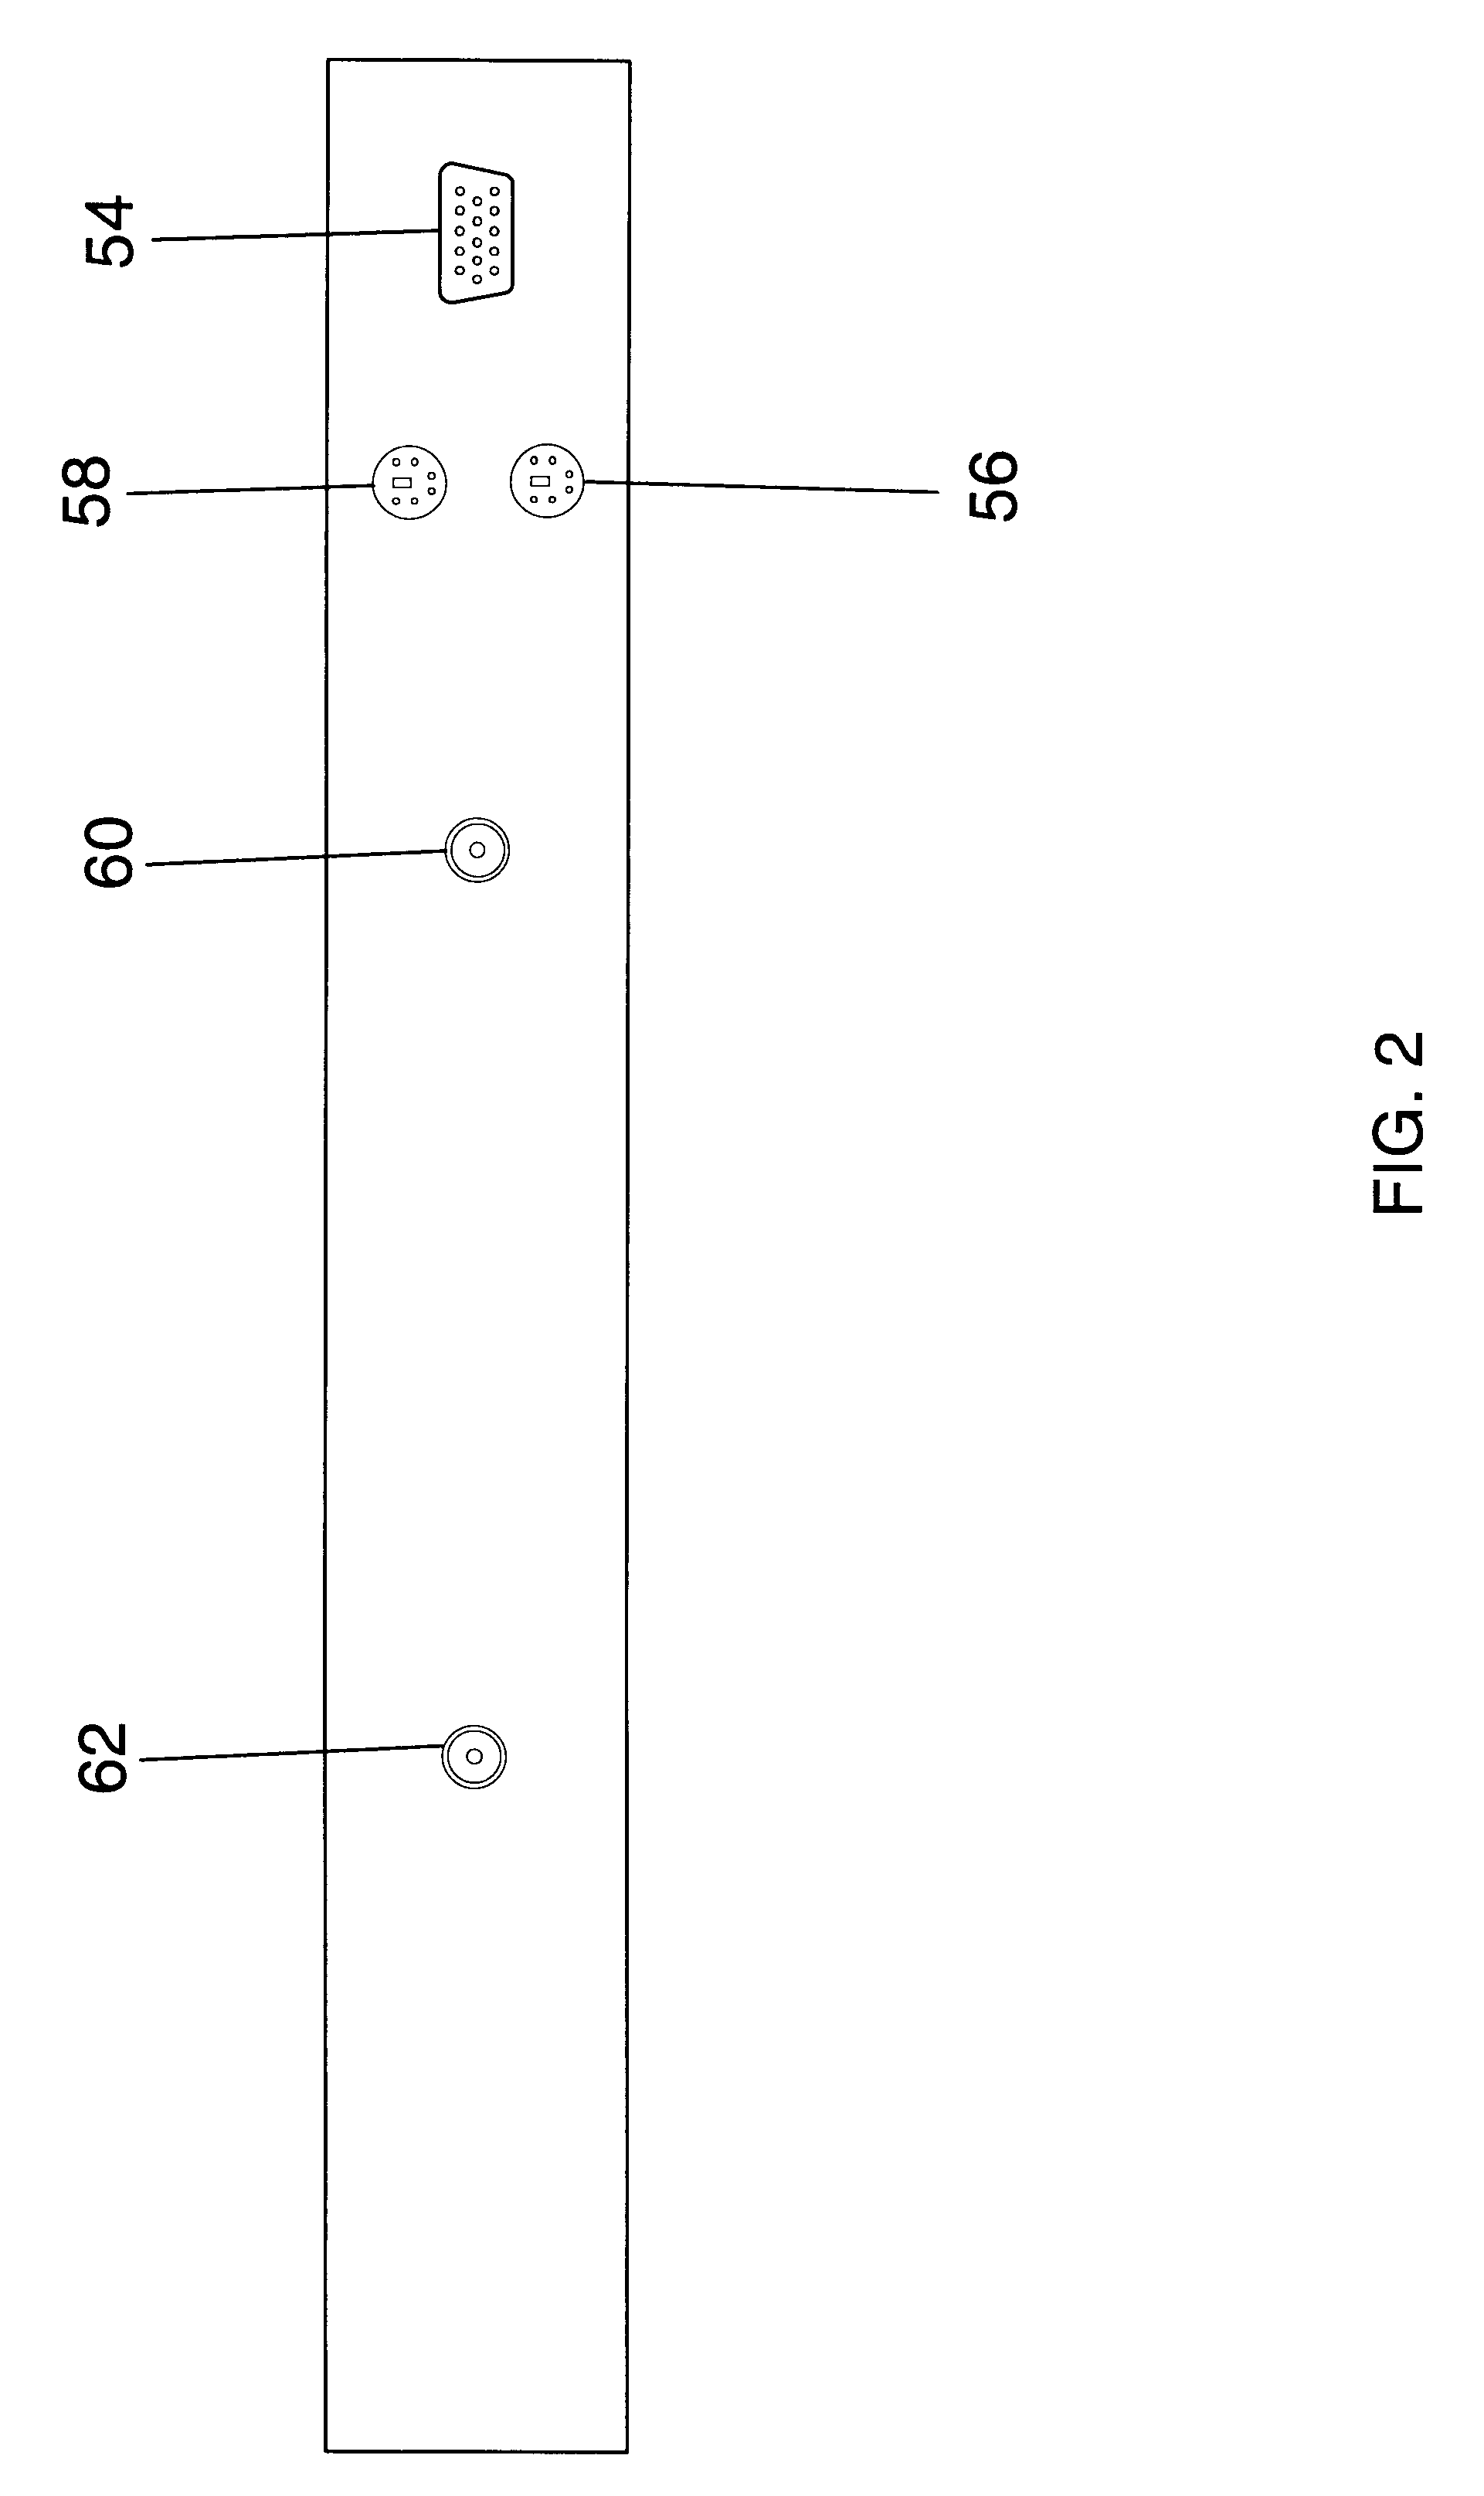 System and method for remotely controlling and monitoring a plurality of computer systems